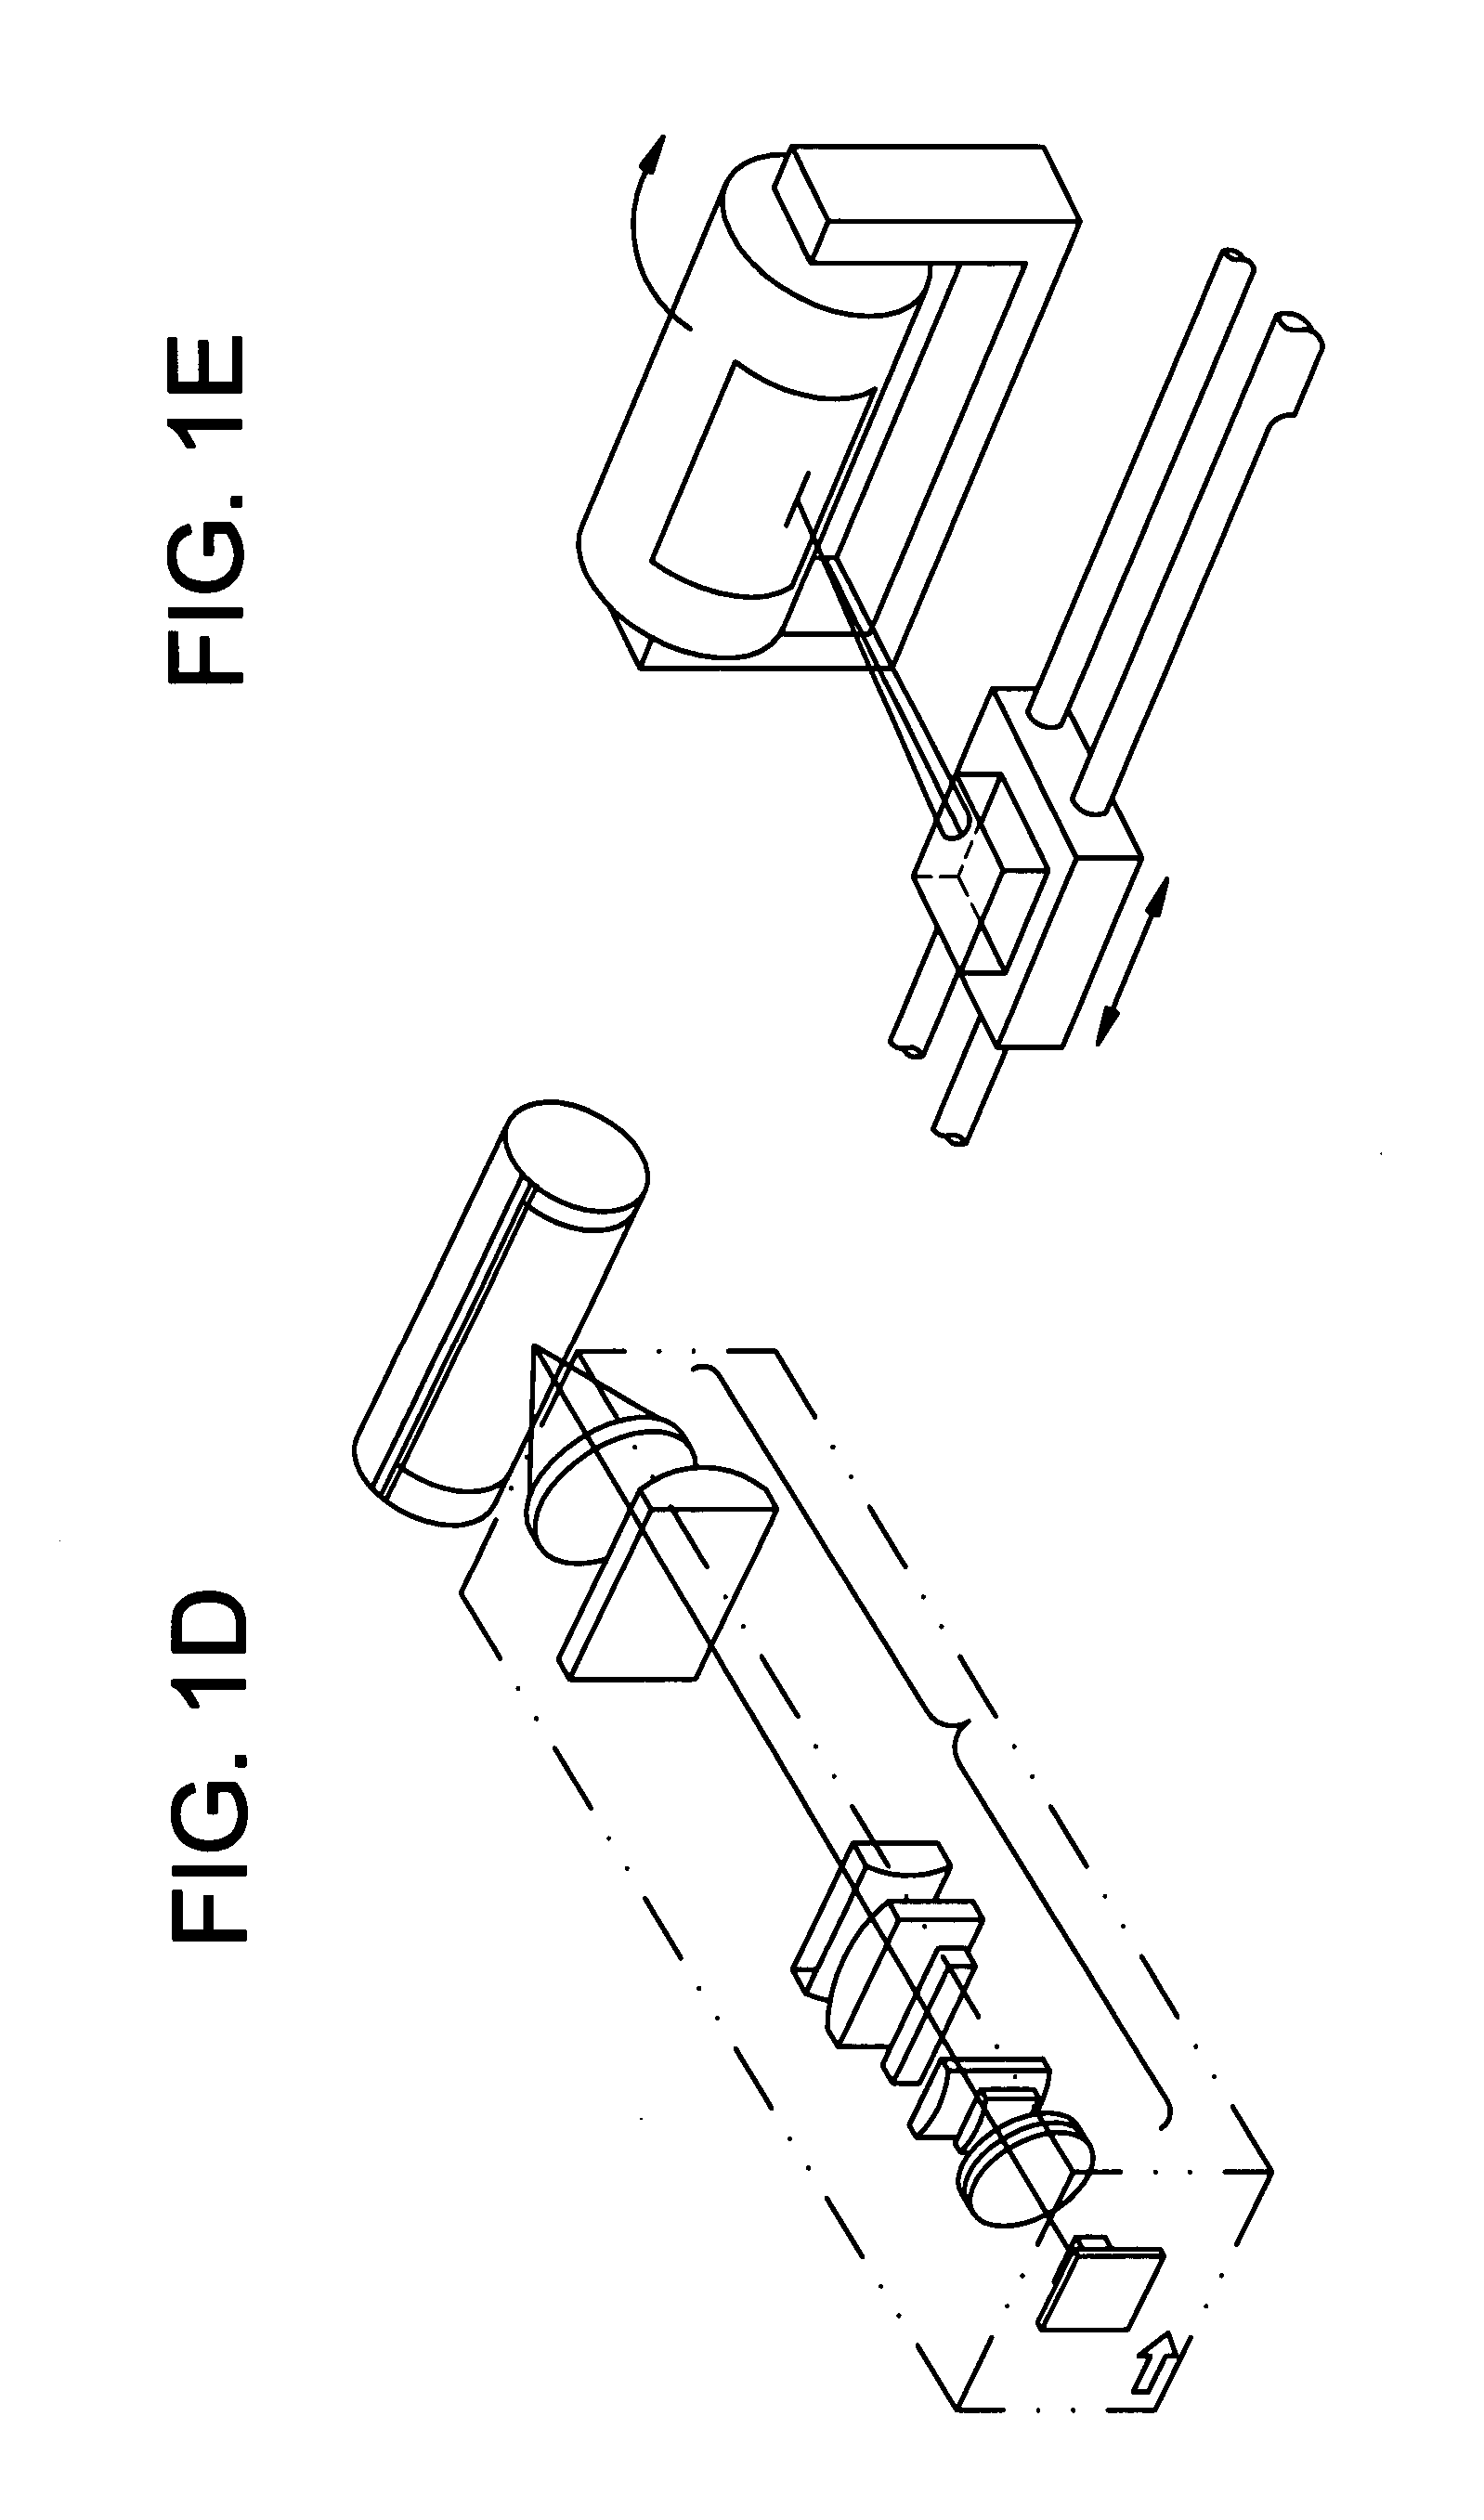 Writing apparatuses and methods